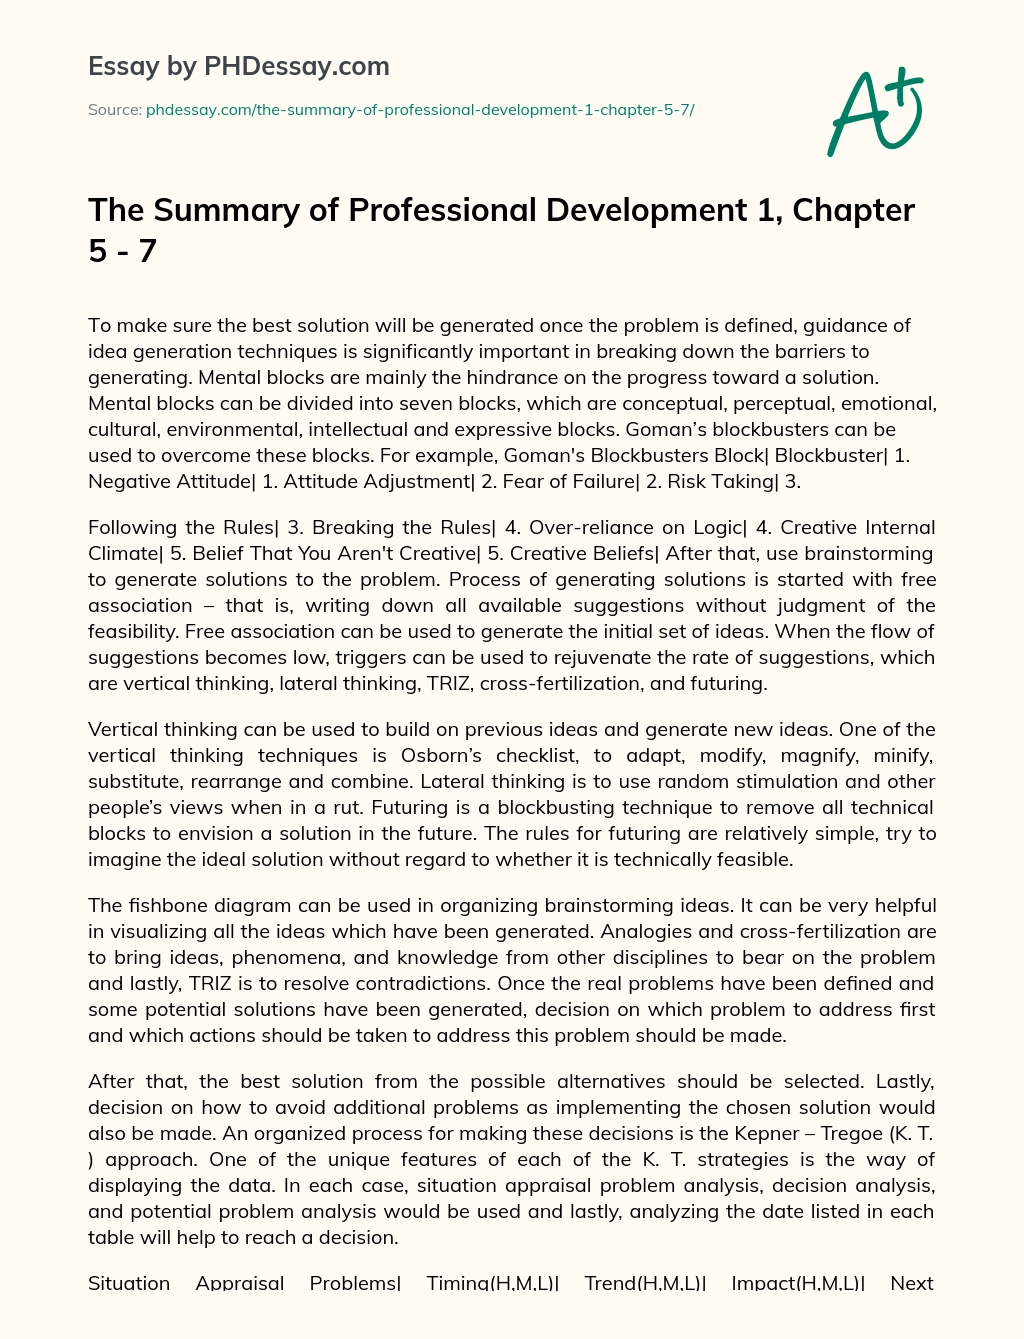 The Summary of Professional Development 1, Chapter 5 – 7 essay